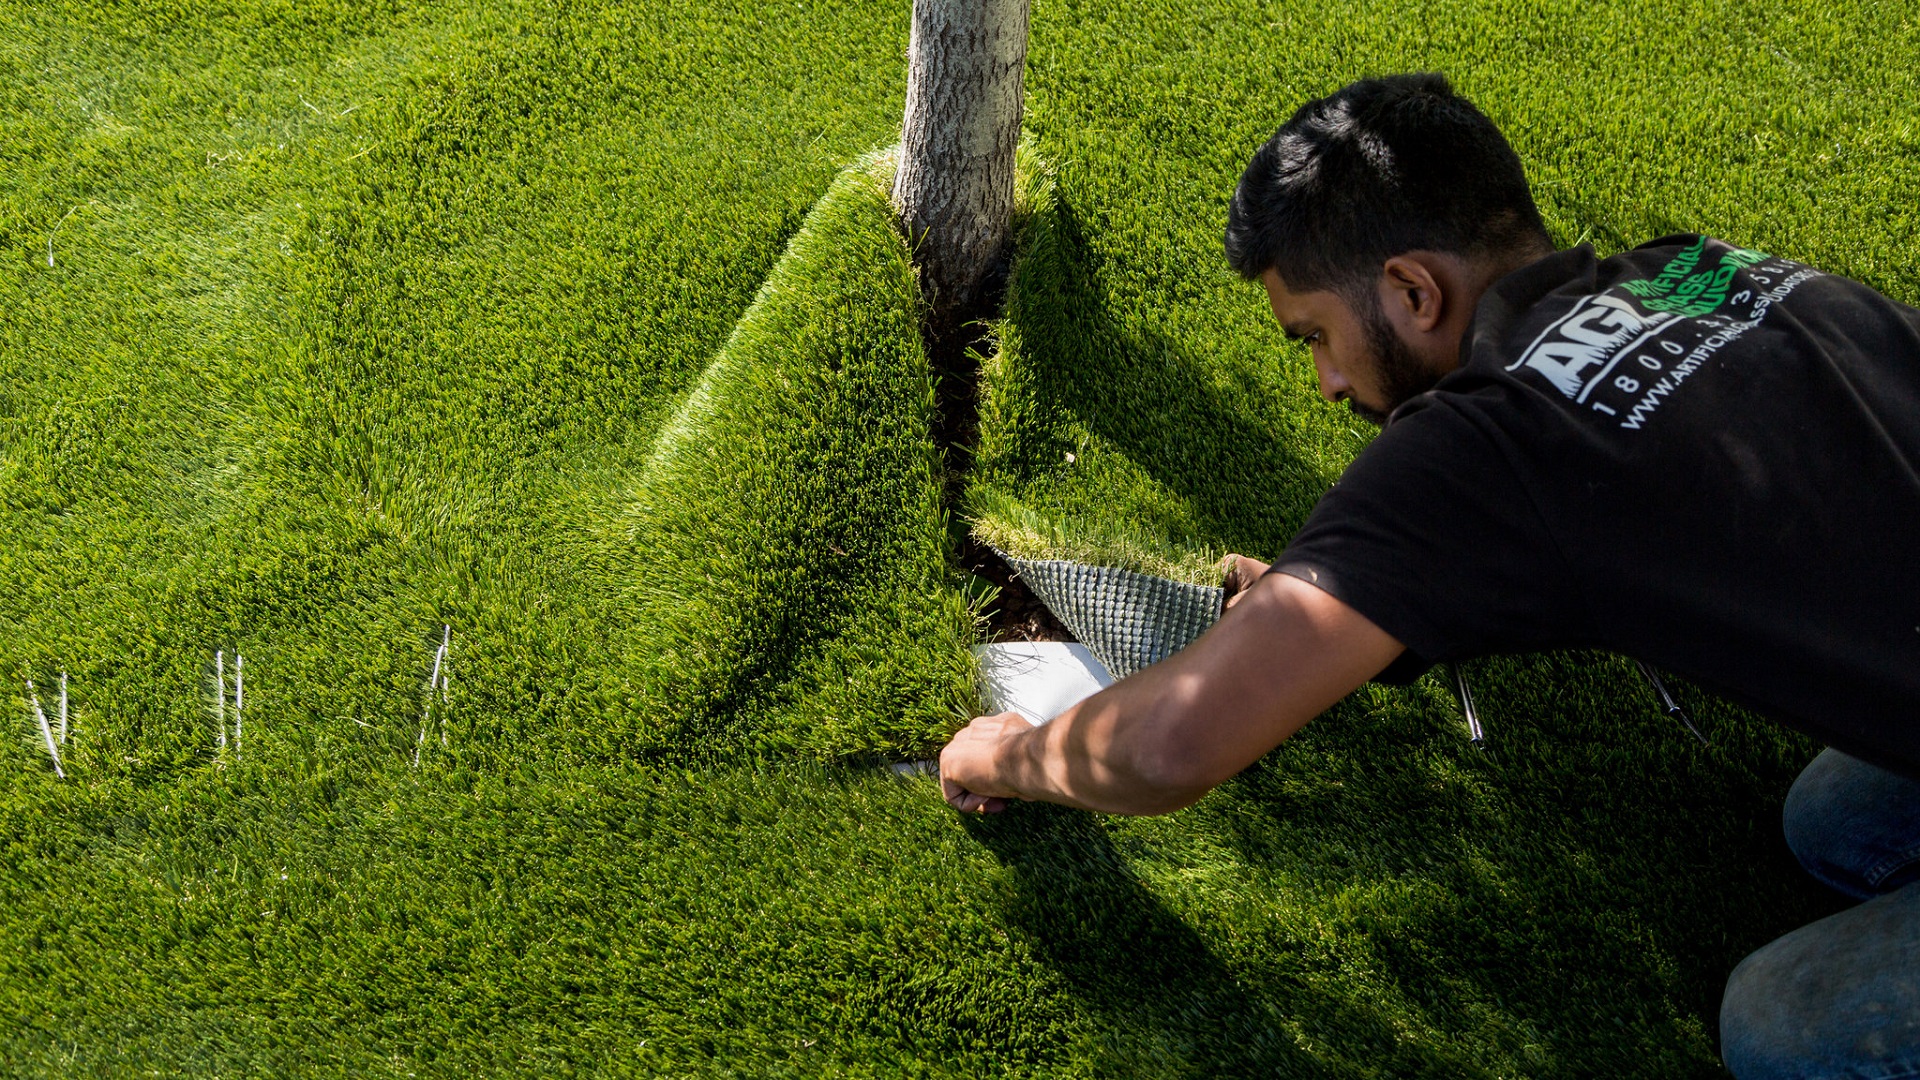 Fake Grass: Can You Make It Work On Your Lawn?